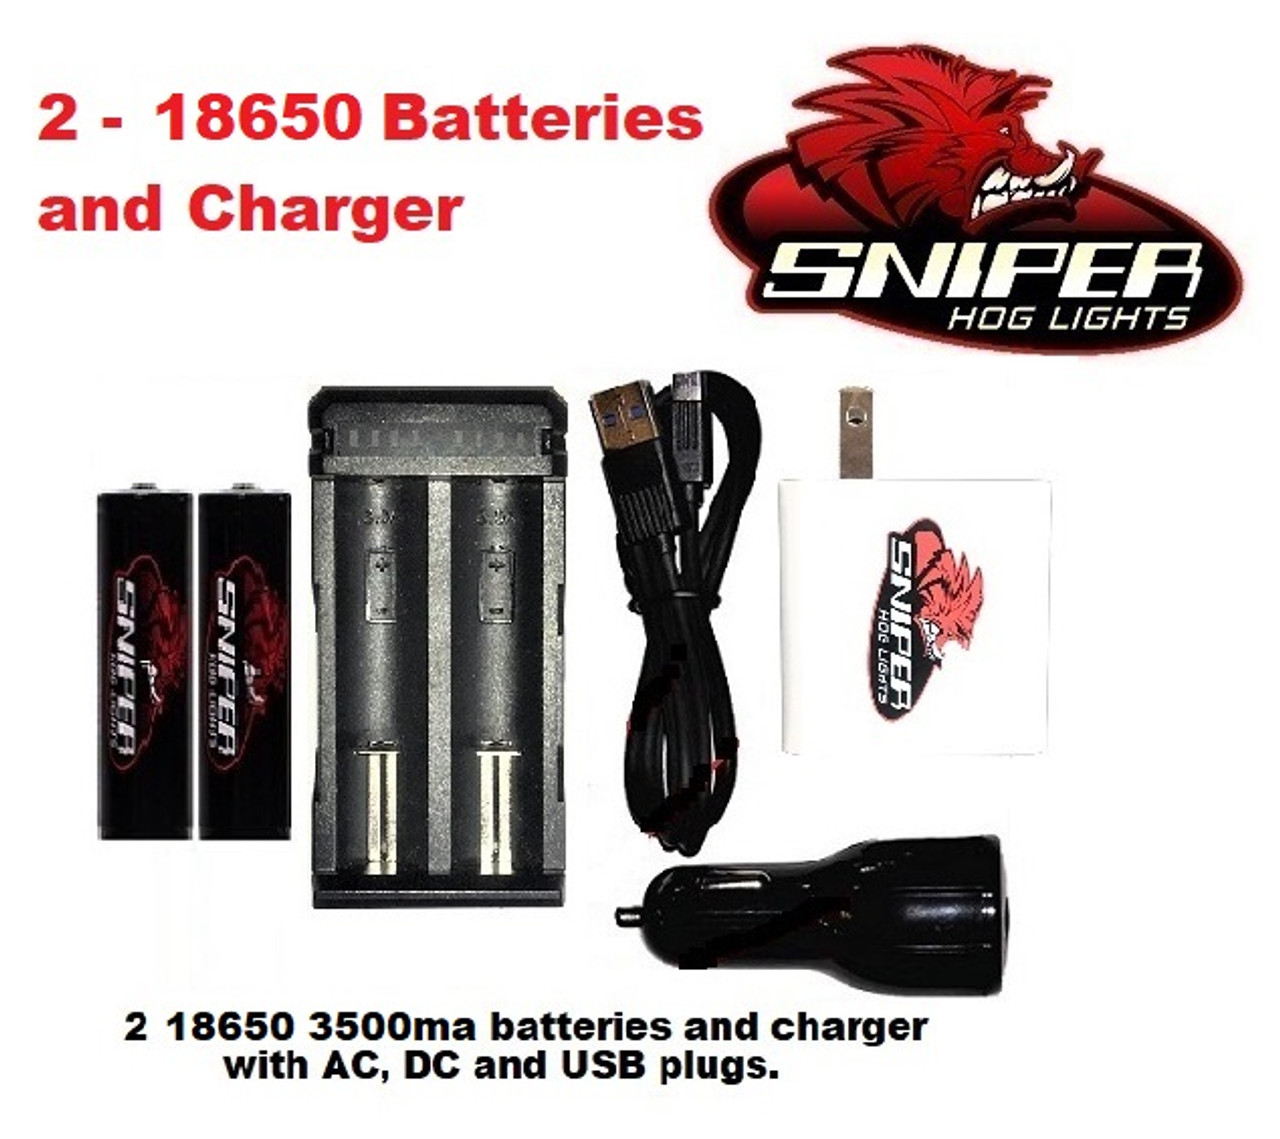 2 18650 batteries and Charger